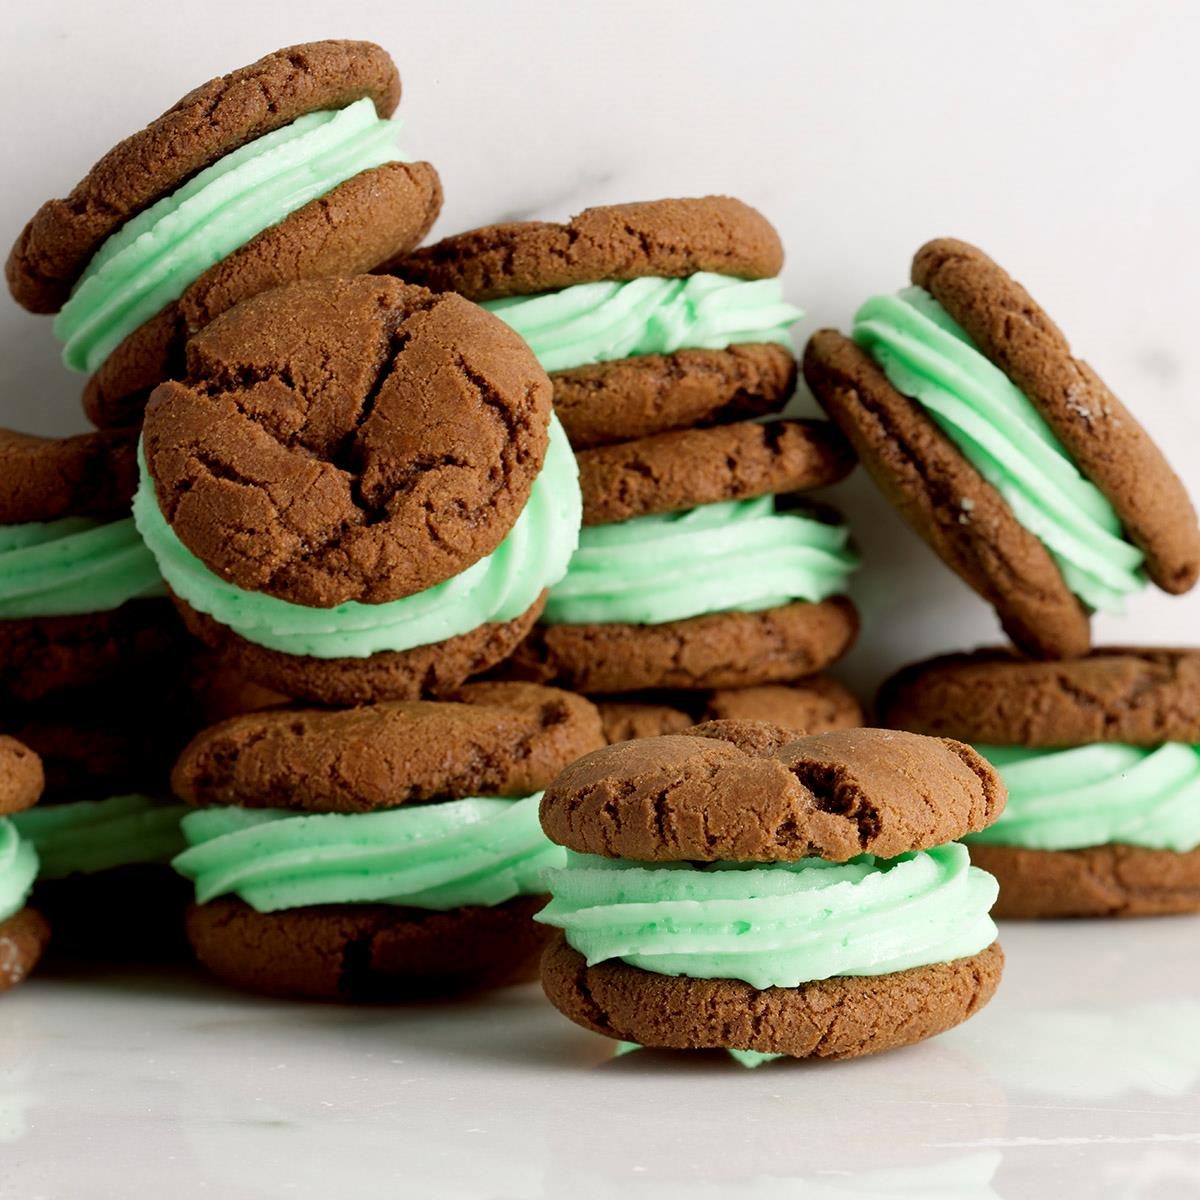 Chocolate Mint Sandwich Cookies Recipe: How to Make It